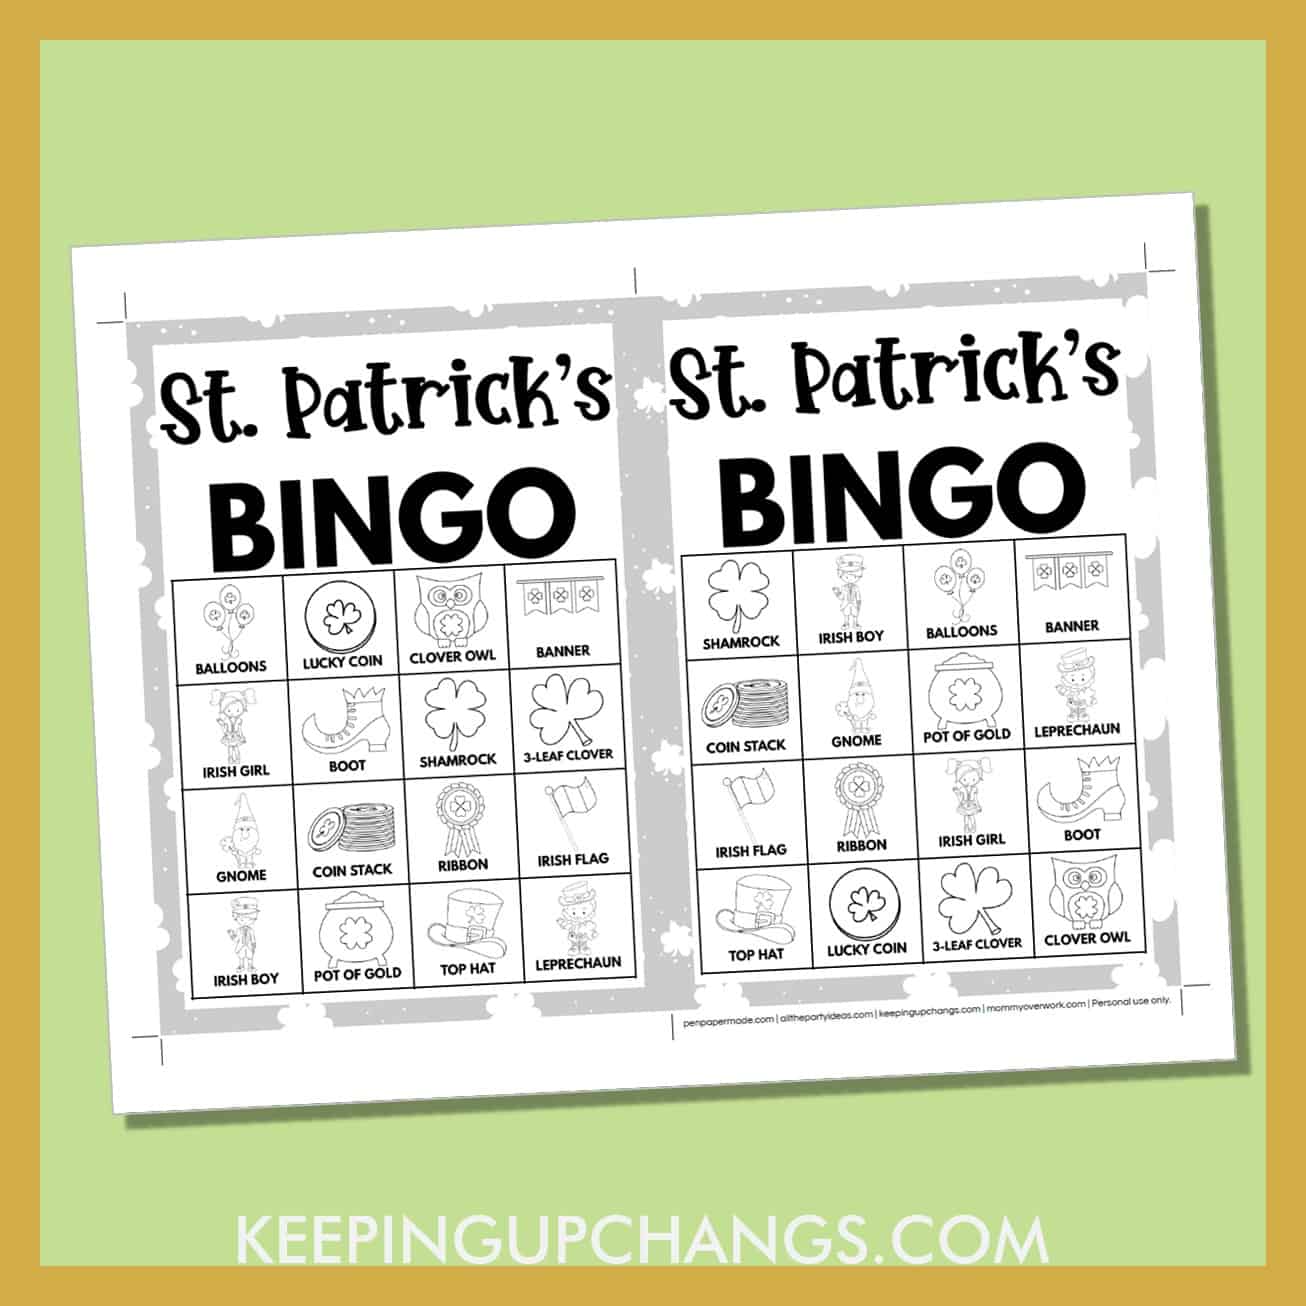 free st patrick's day bingo card 4x4 5x7 black white coloring game boards with images and text words.